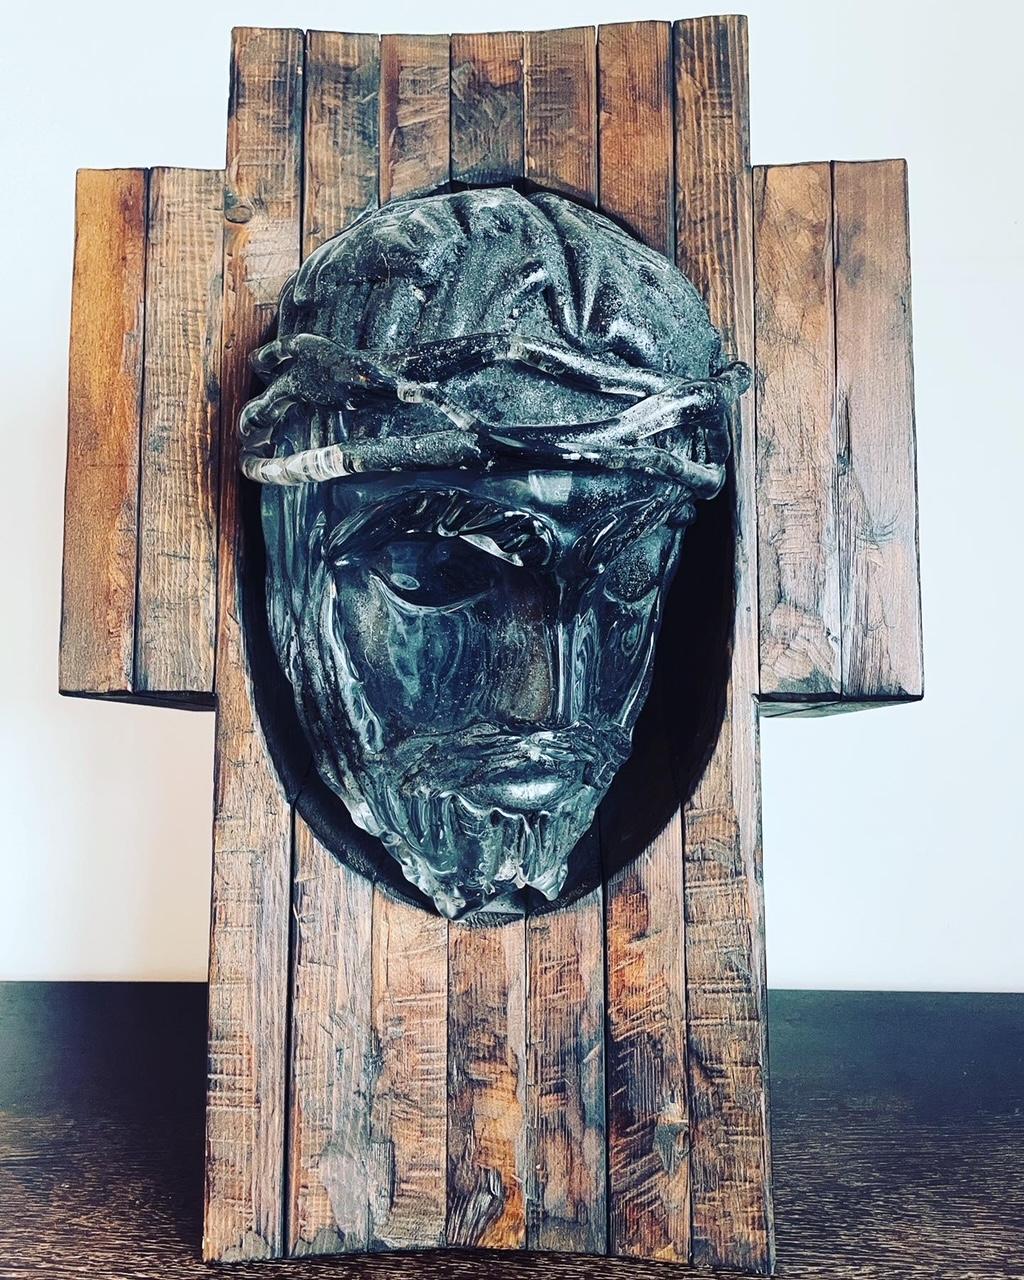 What. A. Piece. Of. Art. This Murano glass sculpture is just stunning. The head of Jesus is made from mouth blown Murano glass. It is worked free hand on a punty in solid glass. It is fixed into a solid wooden 'cross'. It sticks out of the wood and